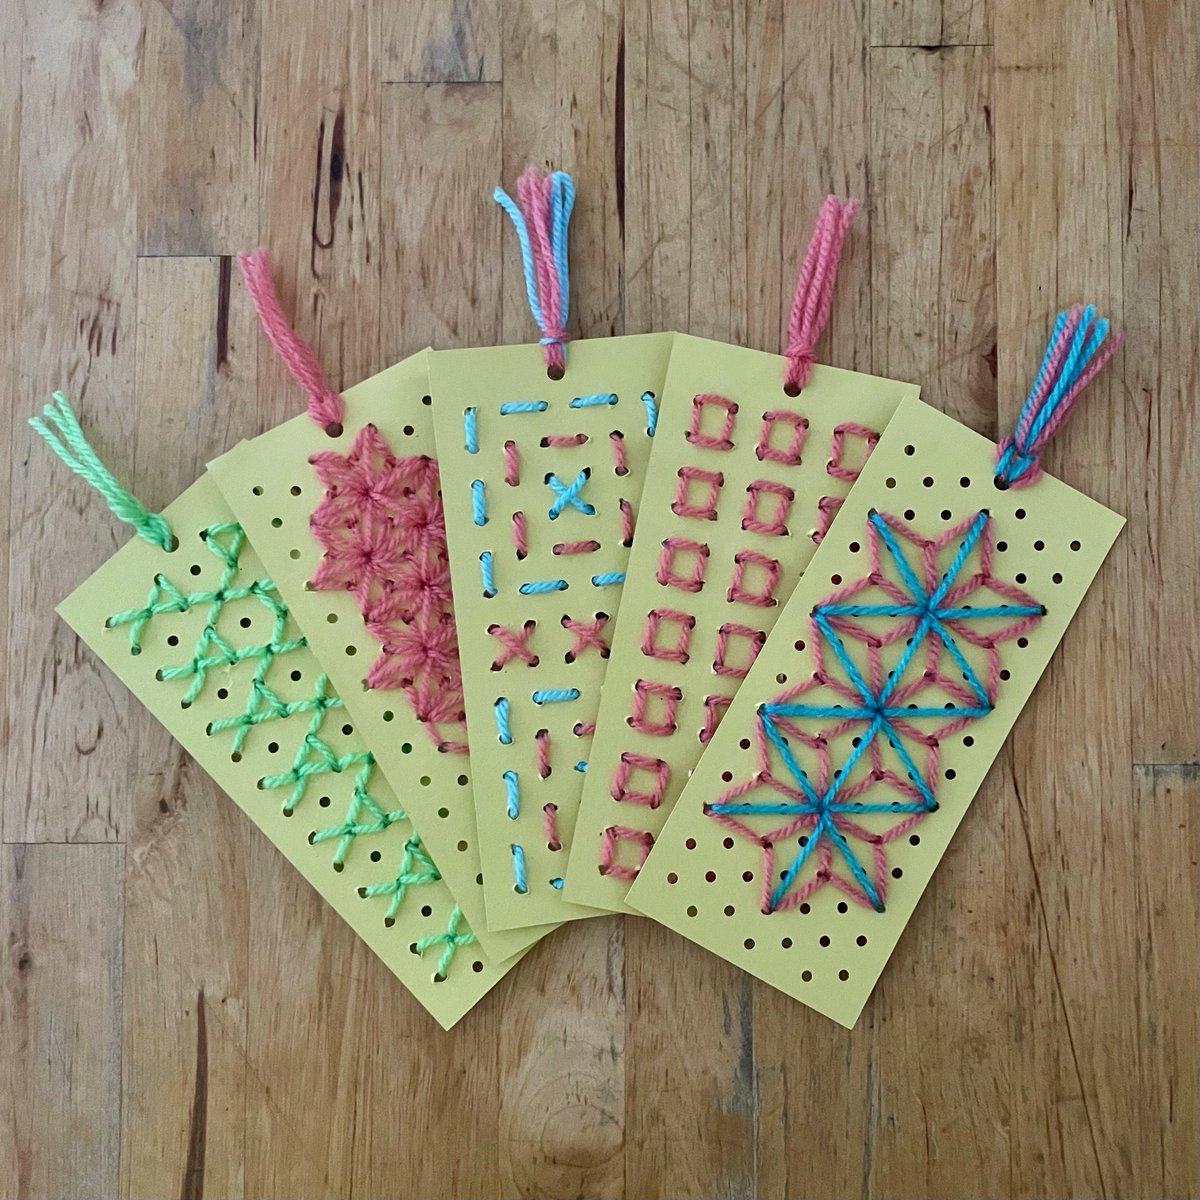 Our next Family Day is Saturday 18 May! And we have a busy day of activities starting at 10am with a talk and demonstration on the art of Tsumugi weaving with Tomo Yoshizawa. Then from 1pm join Mika Sembongi for Sashiko craft workshops. FREE. Drop in. bit.ly/4dn4HOu